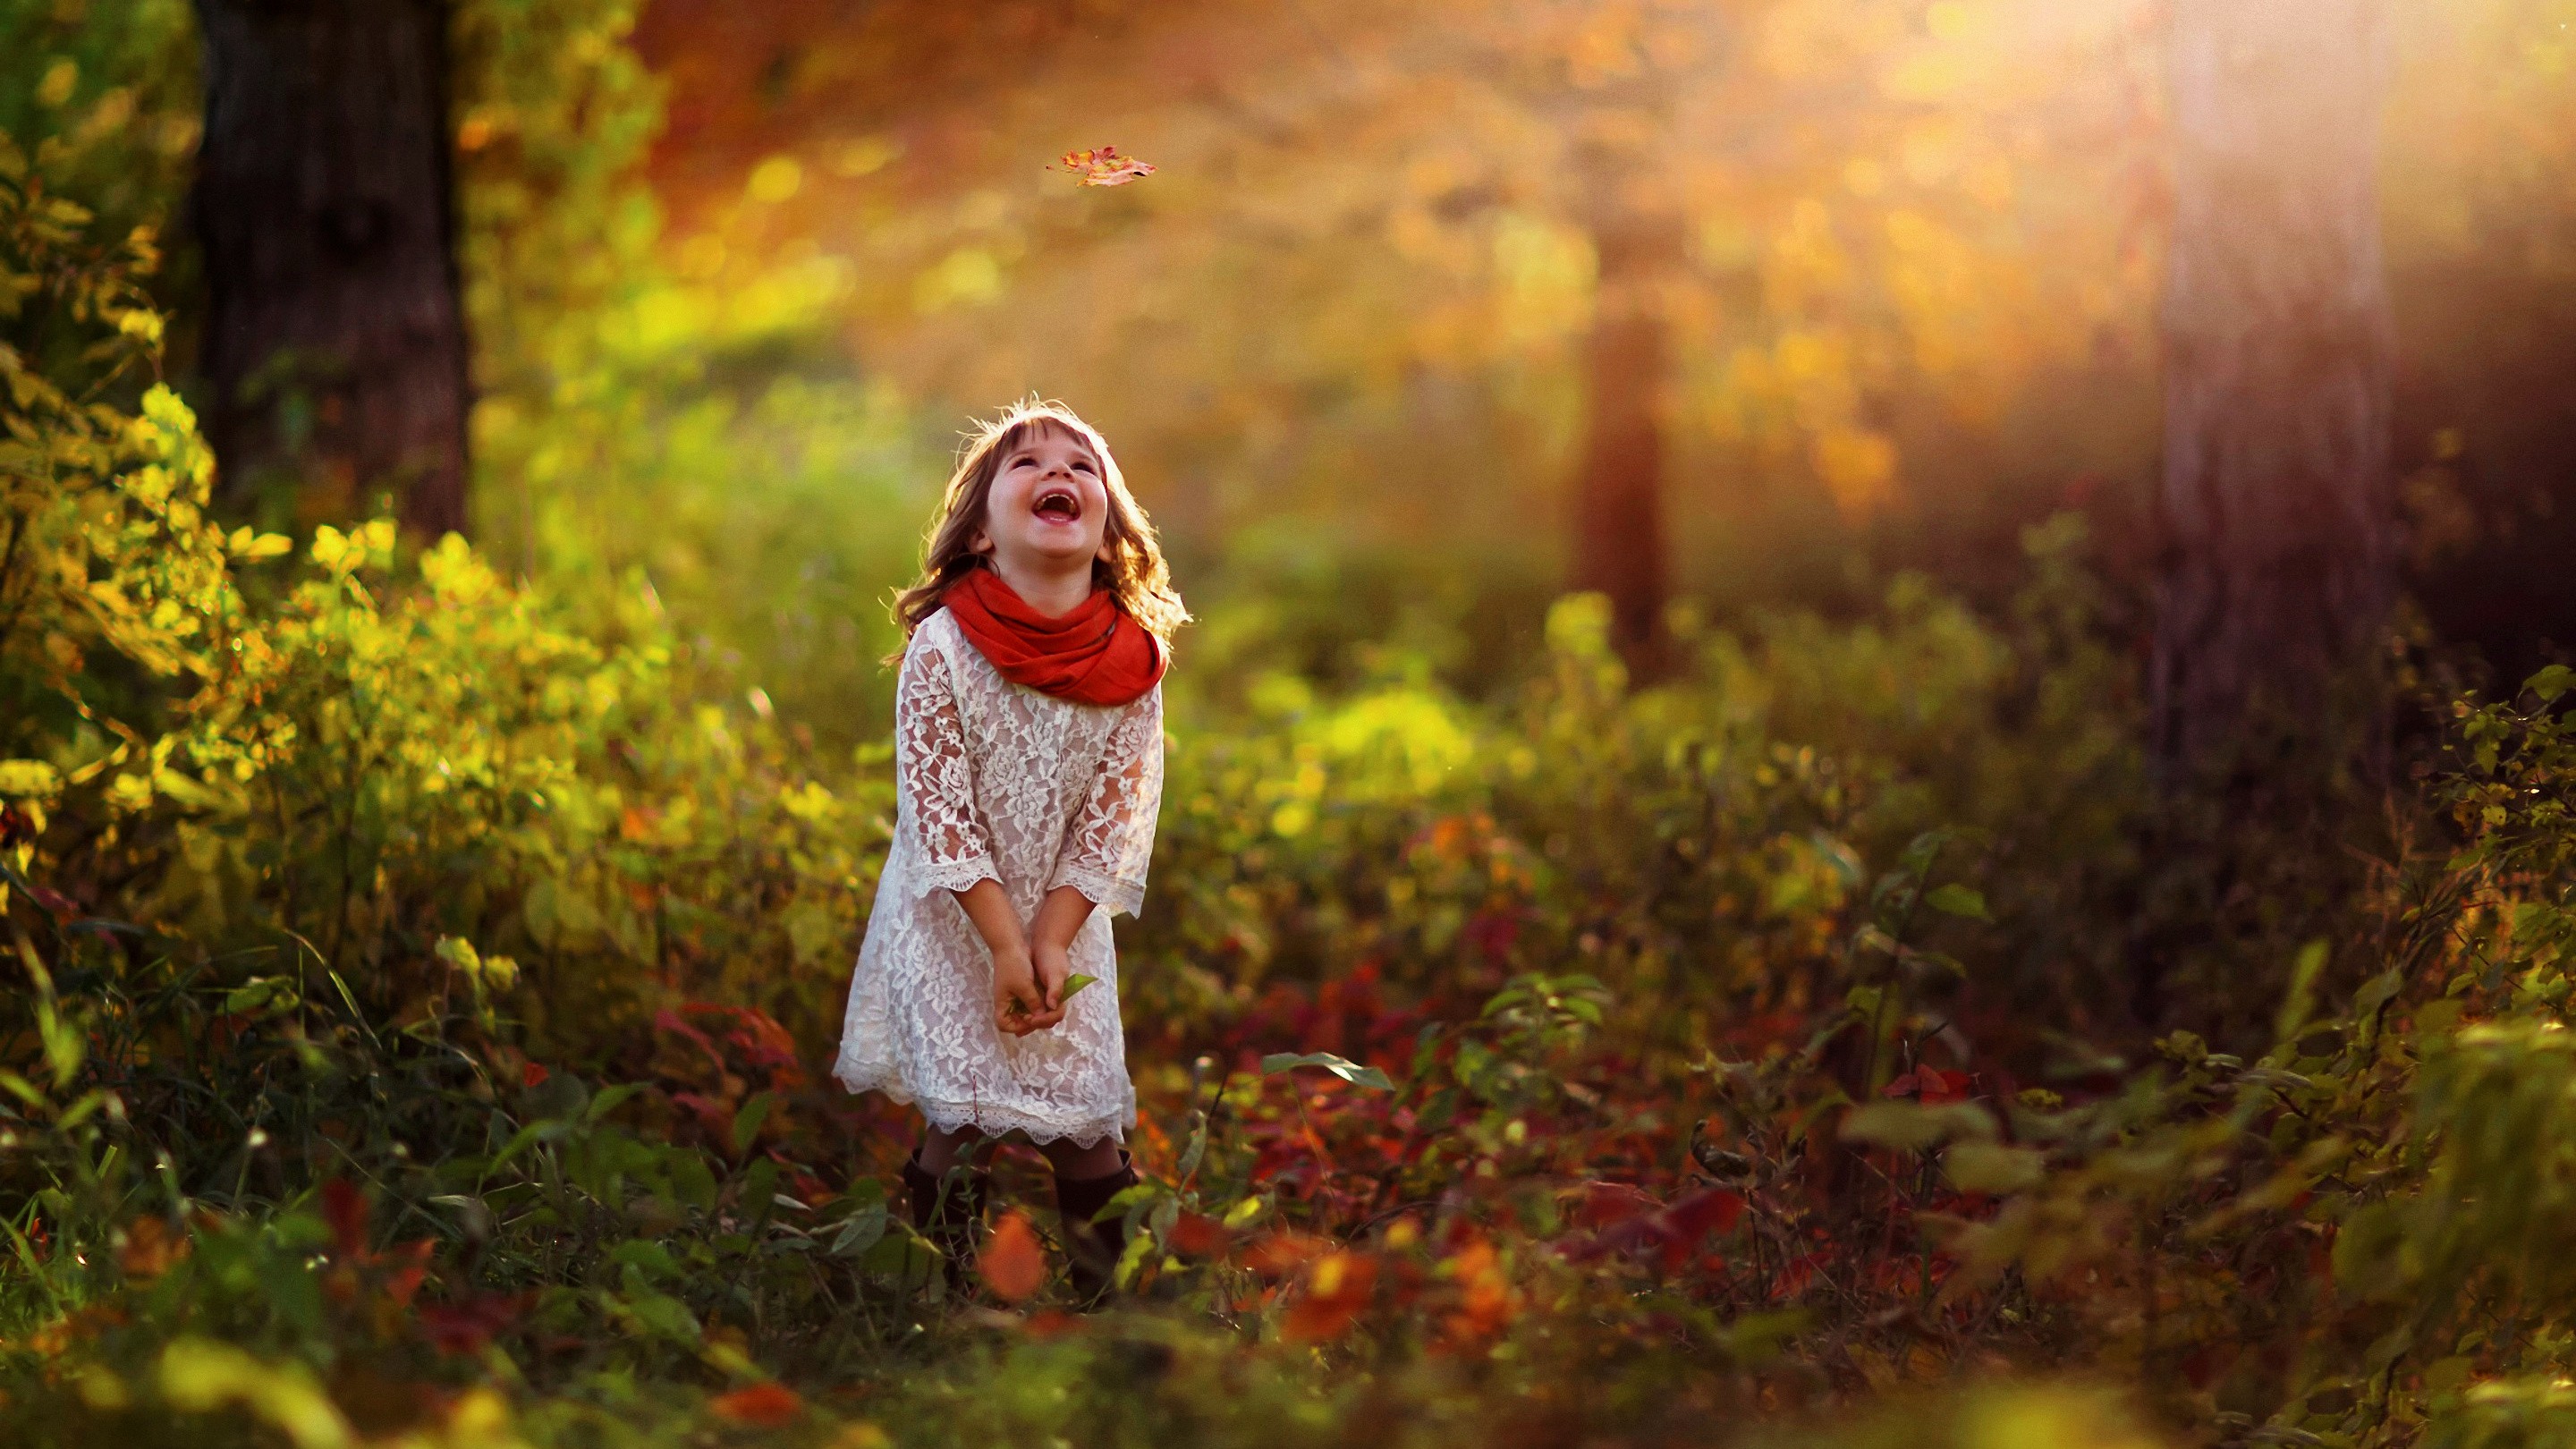 People 2880x1620 children photography Jake Olson outdoors laughing plants calm sunlight